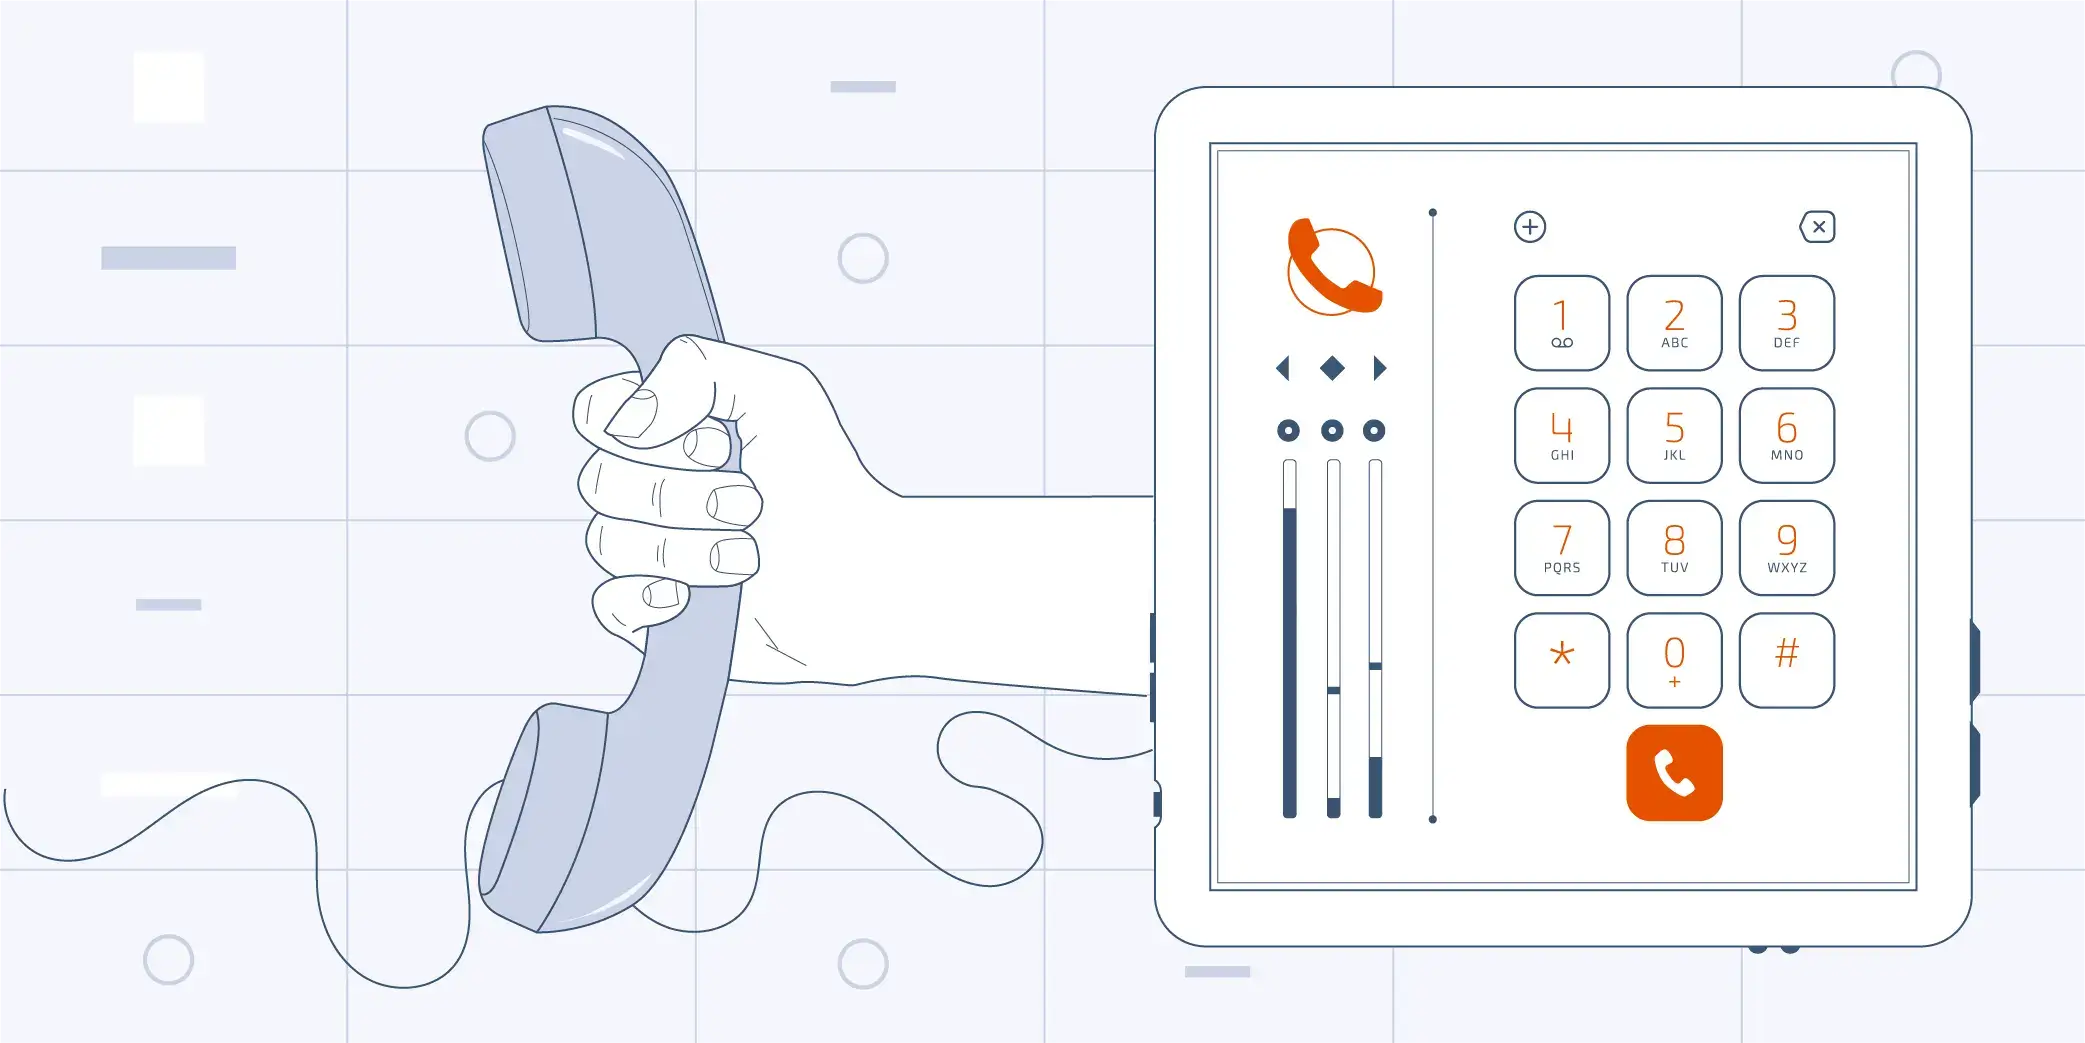 What Is a VoIP Phone & How Does It Work? [+ Best Picks]